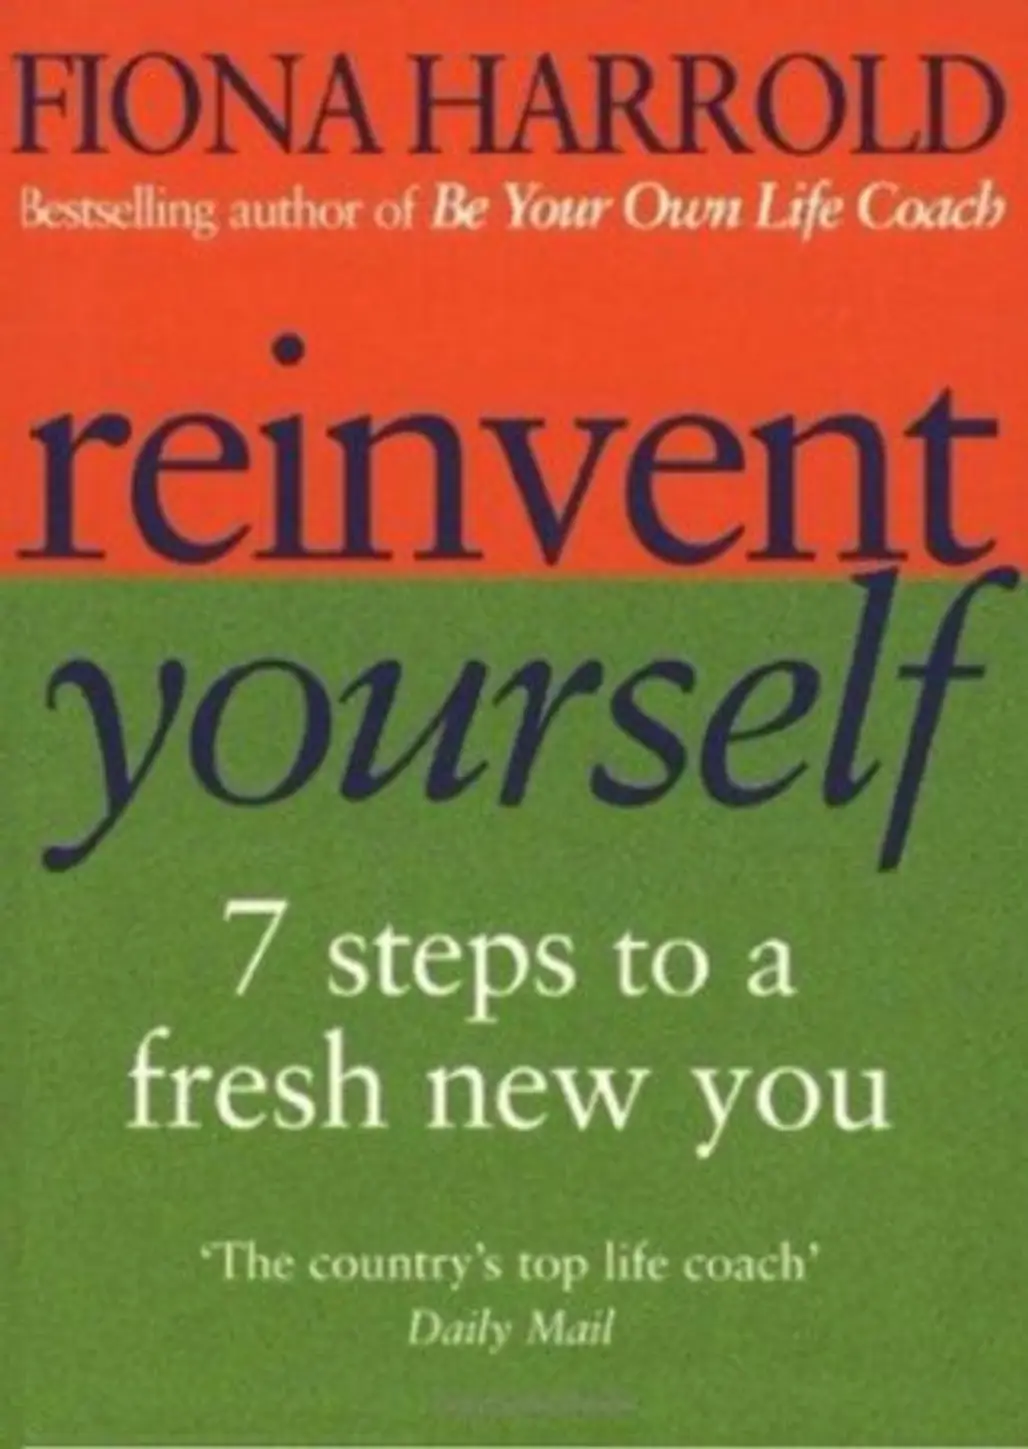 Reinvent Yourself: 7 Steps to a New You